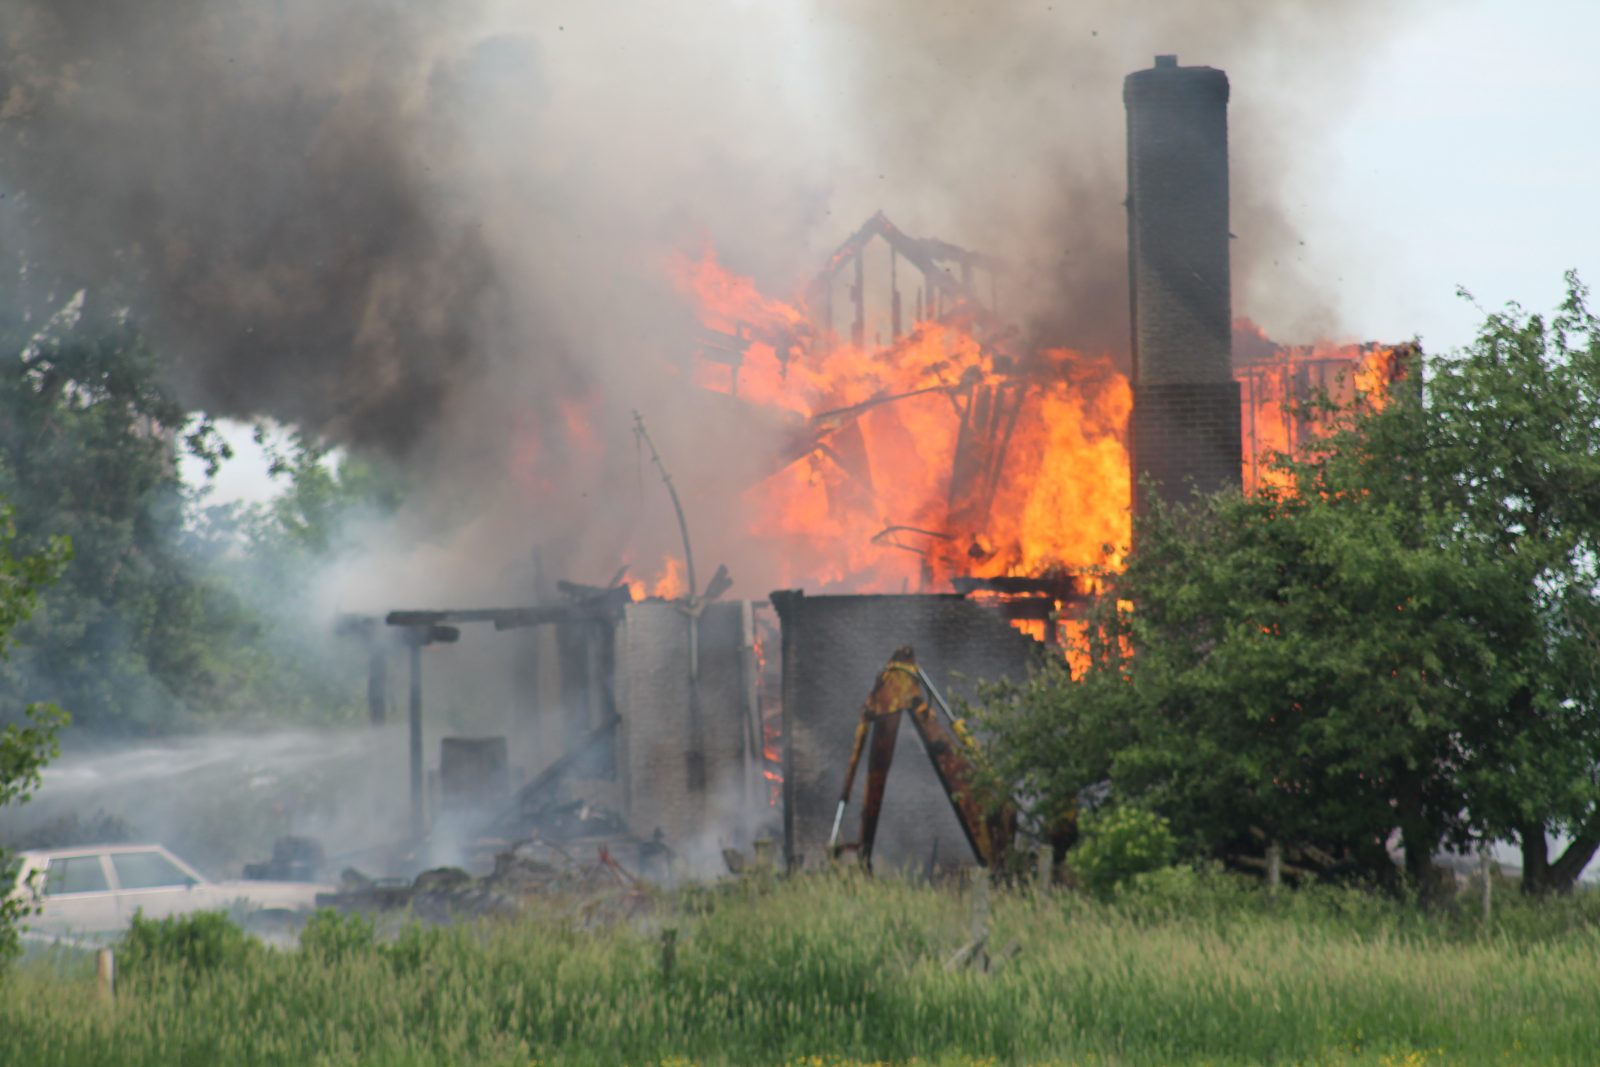 Compton farmhouse consumed by flames